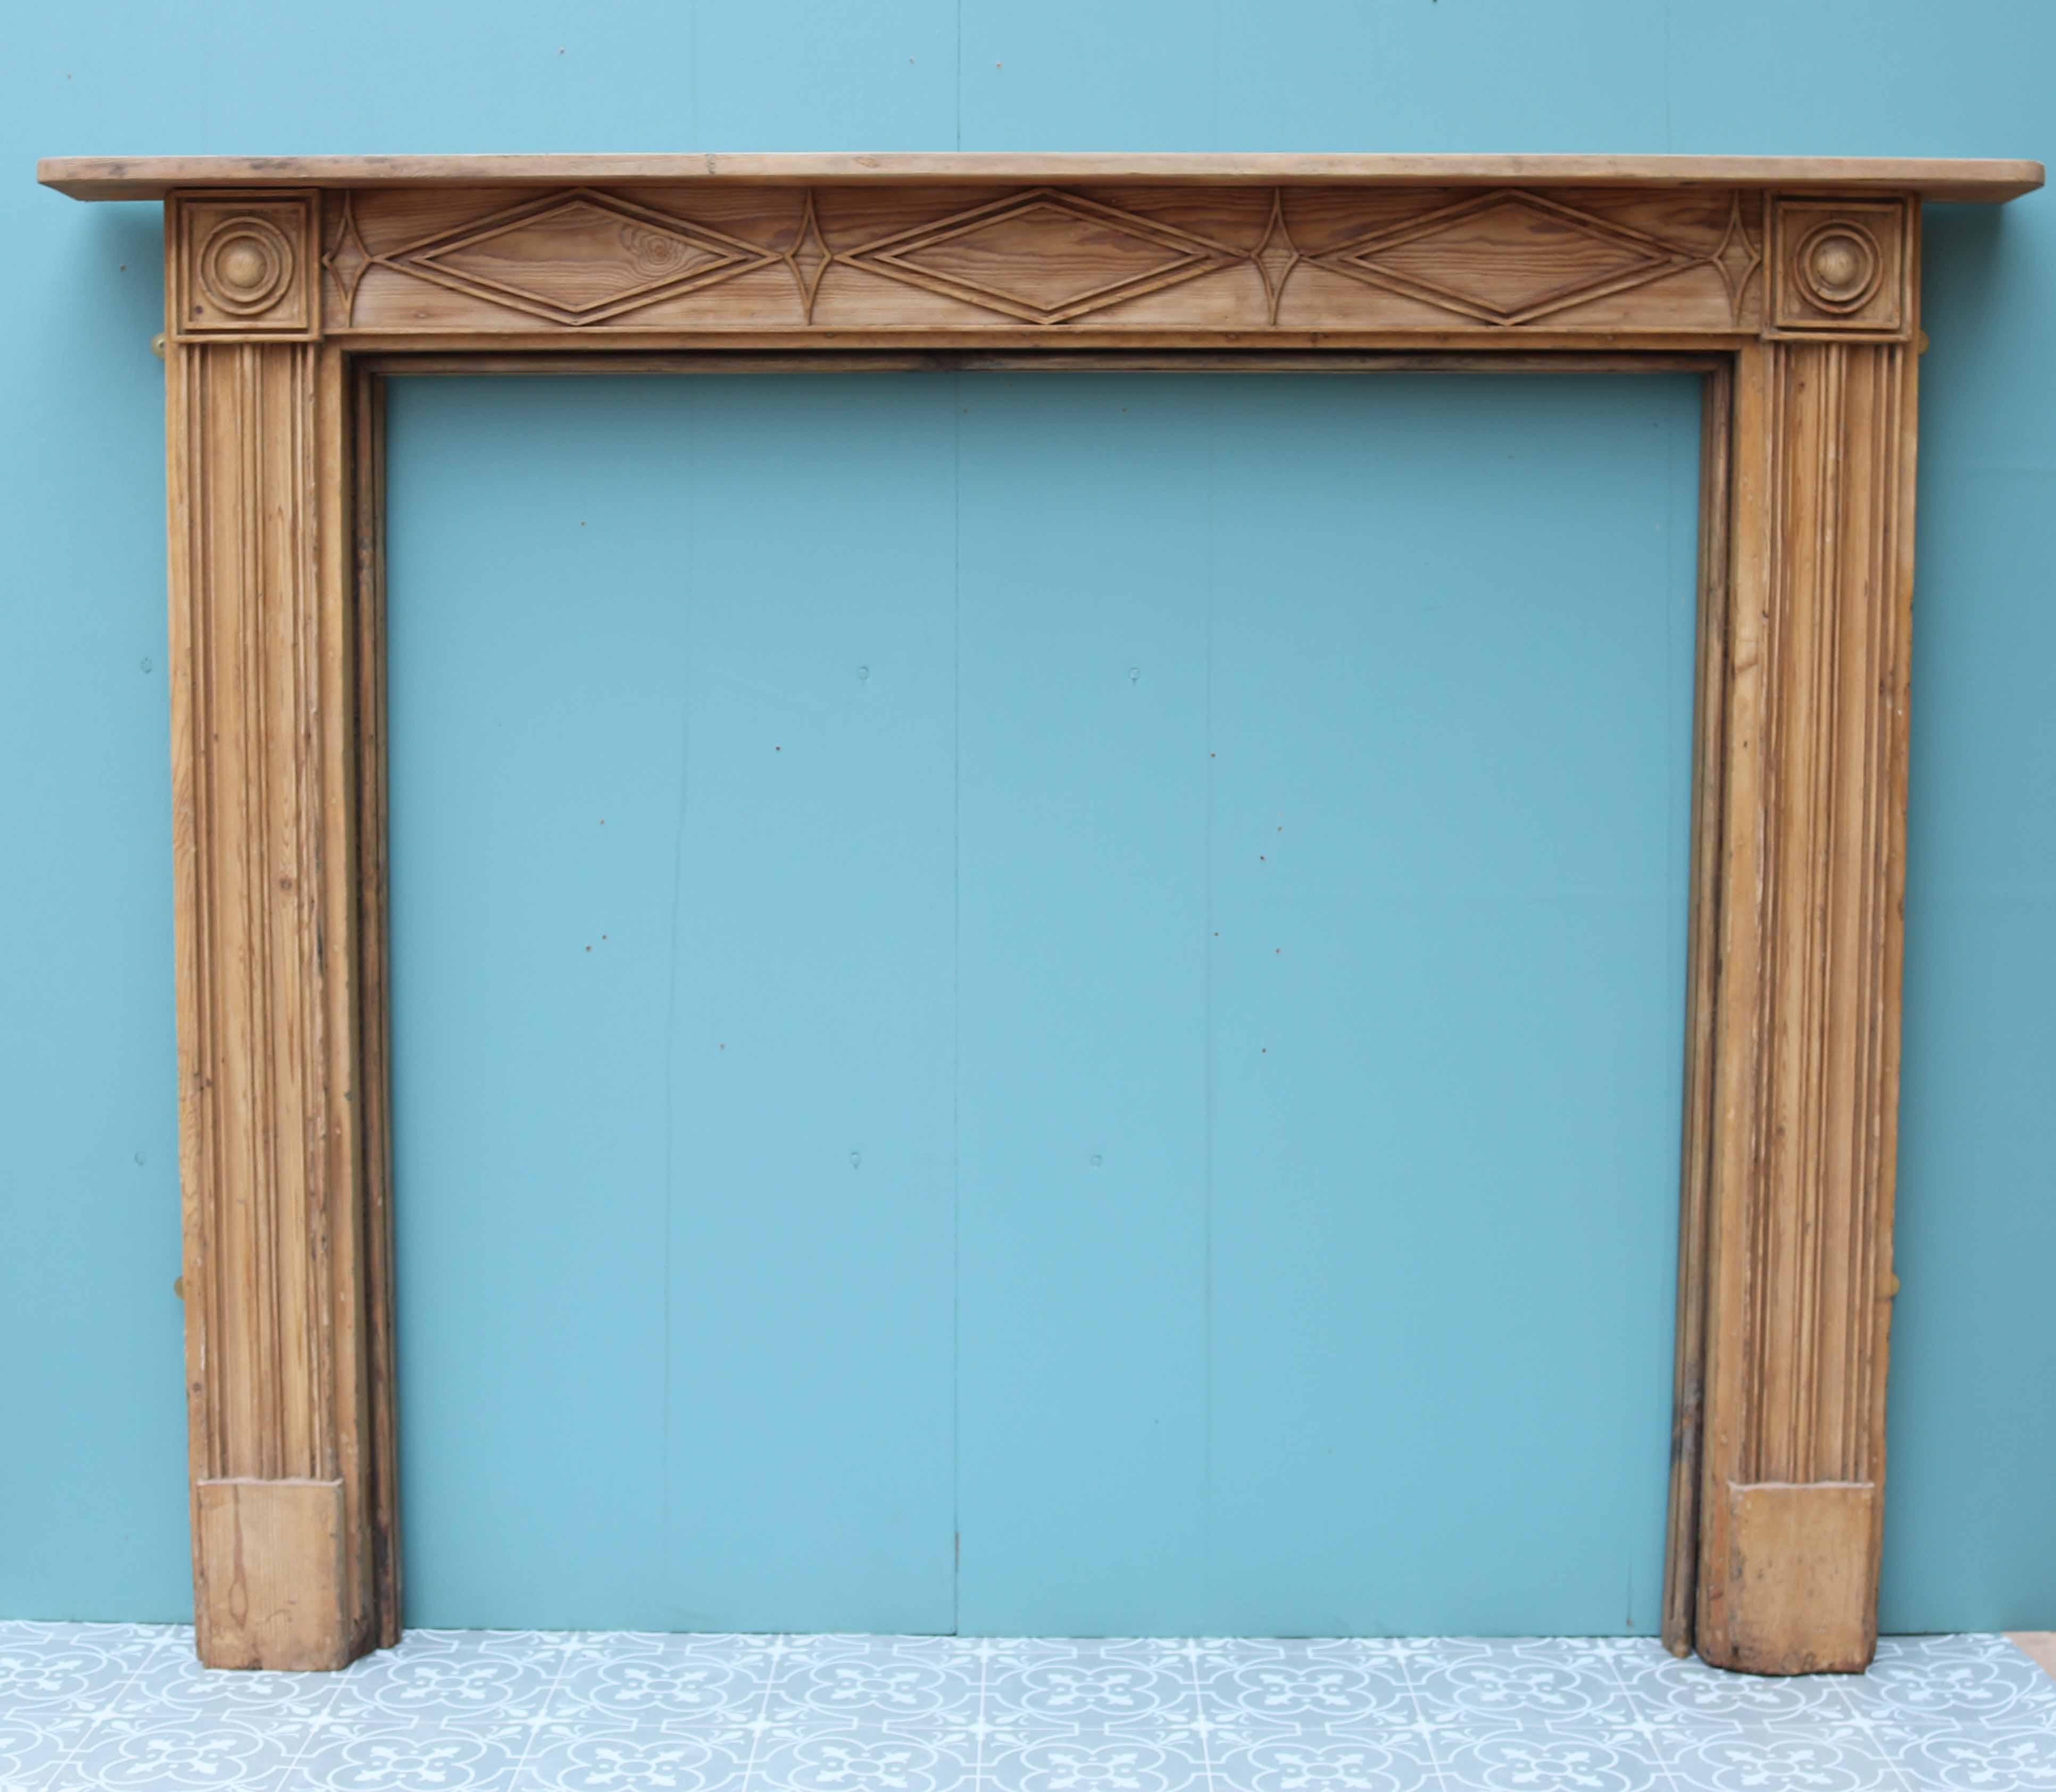 About

A large Georgian bulls eye fire surround. This was reclaimed from a property in Bath.

Condition report

Good structural condition.

Style

Georgian

Date of manufacture

circa 1790

Period

18th